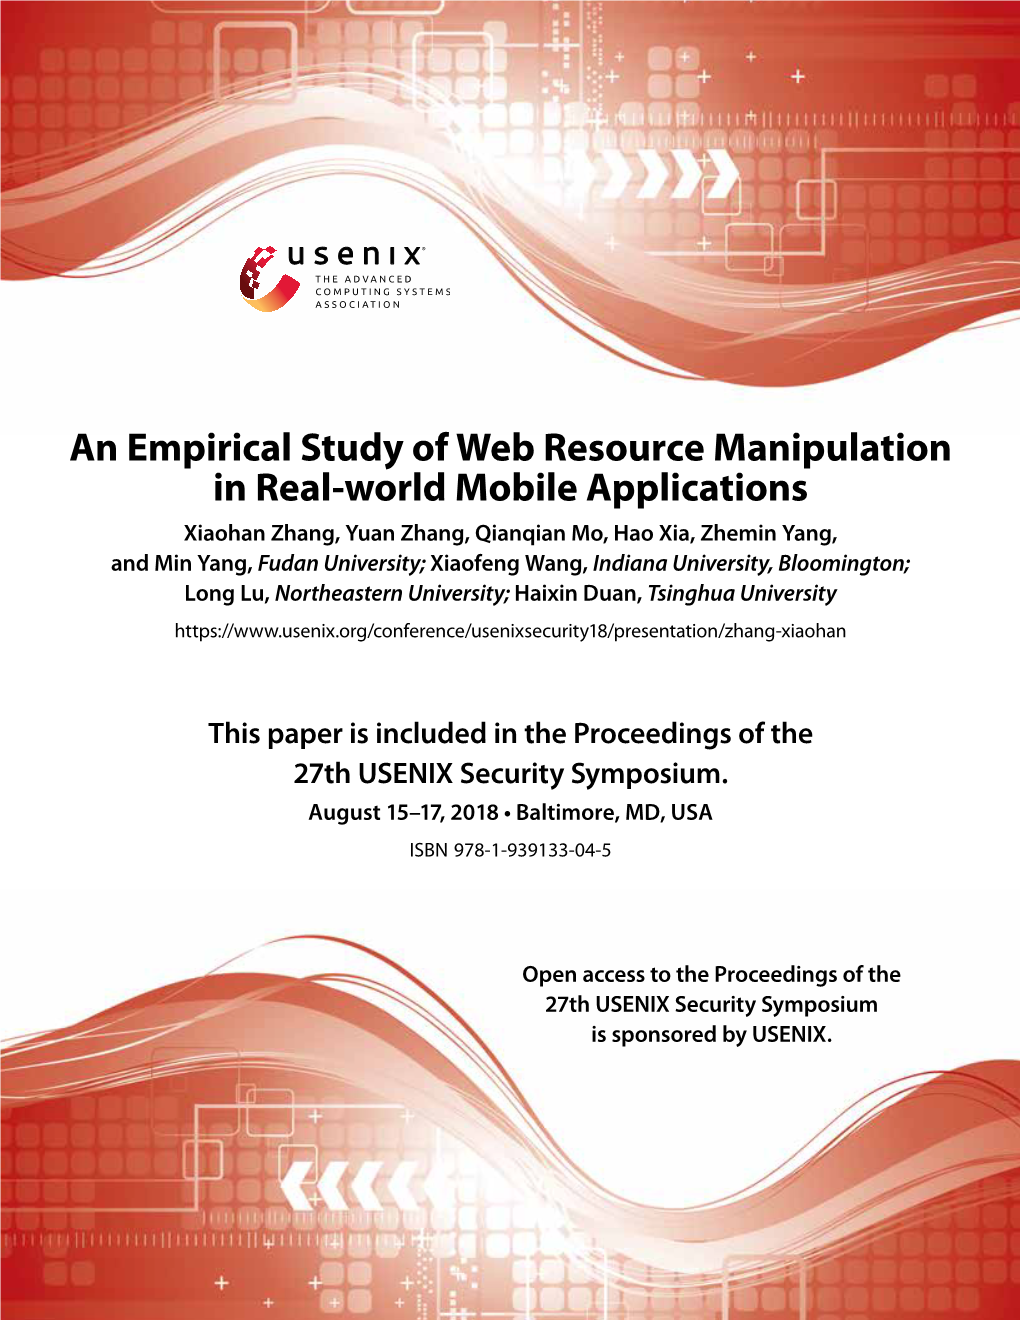 An Empirical Study of Web Resource Manipulation in Real-World Mobile